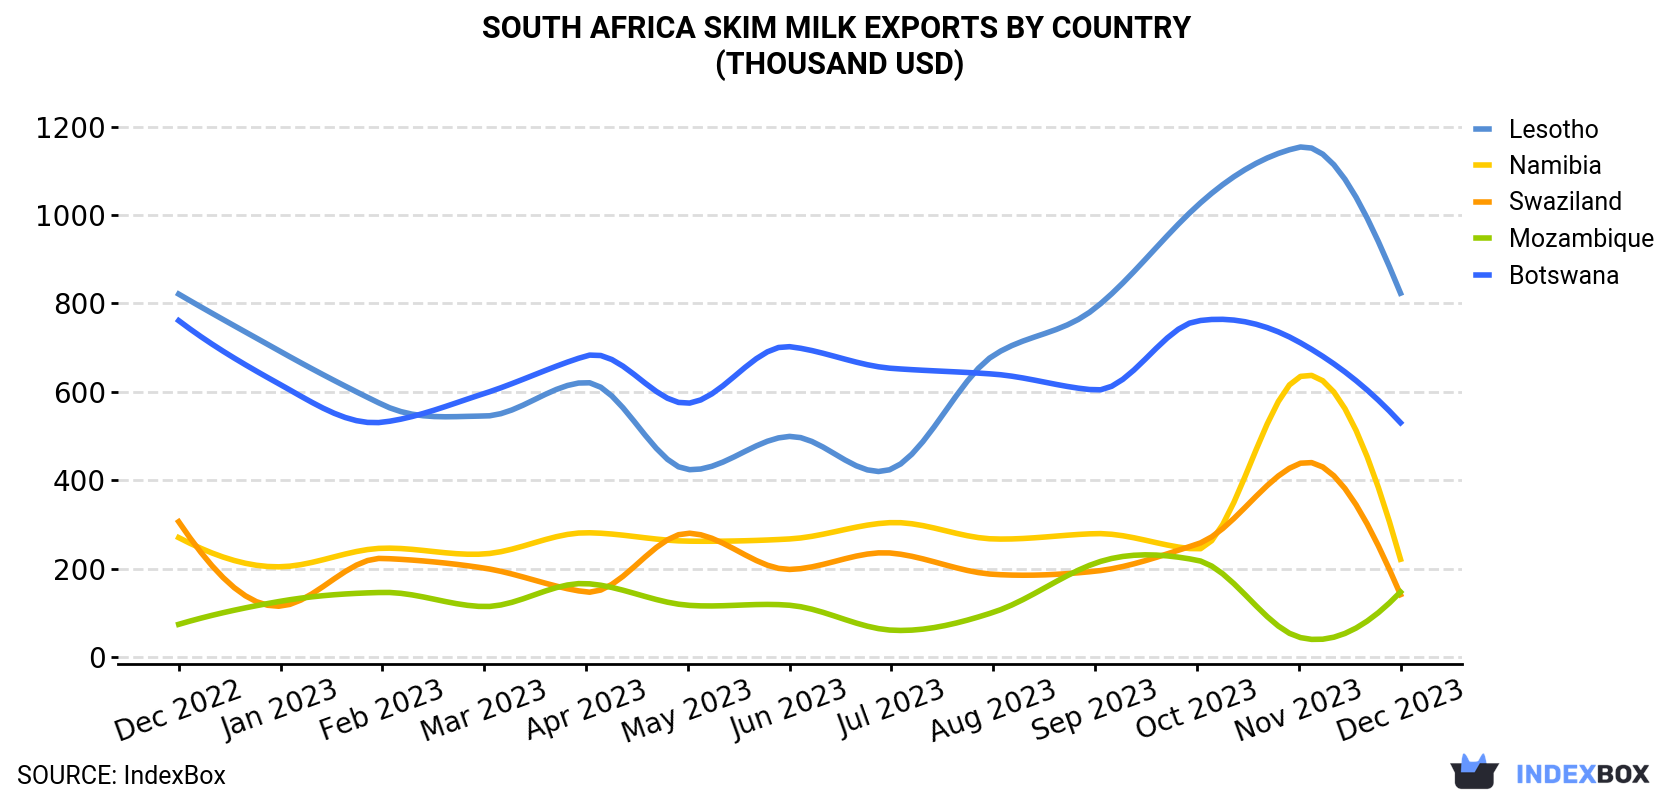 South Africa Skim Milk Exports By Country (Thousand USD)